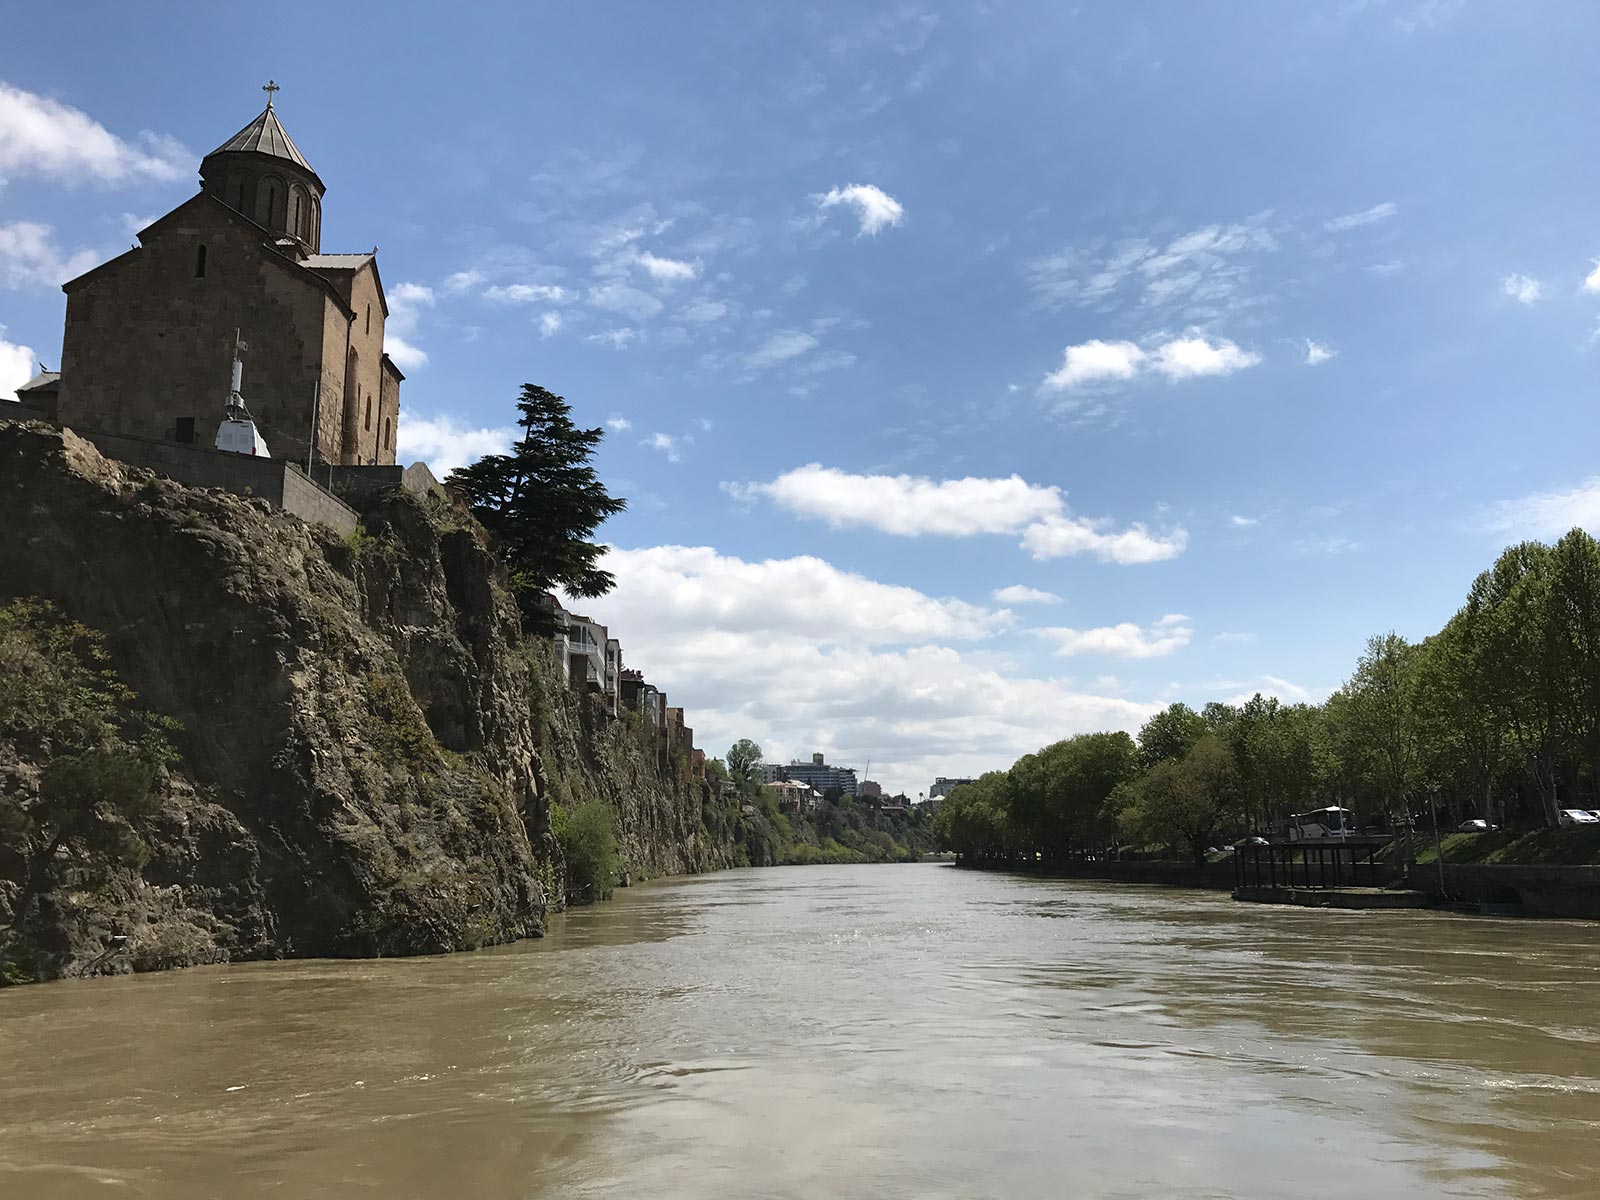 Churce by the river in Tbilisi, Georgia. Bangladesh, The Persian Gulf, The Caucasus & The Stans